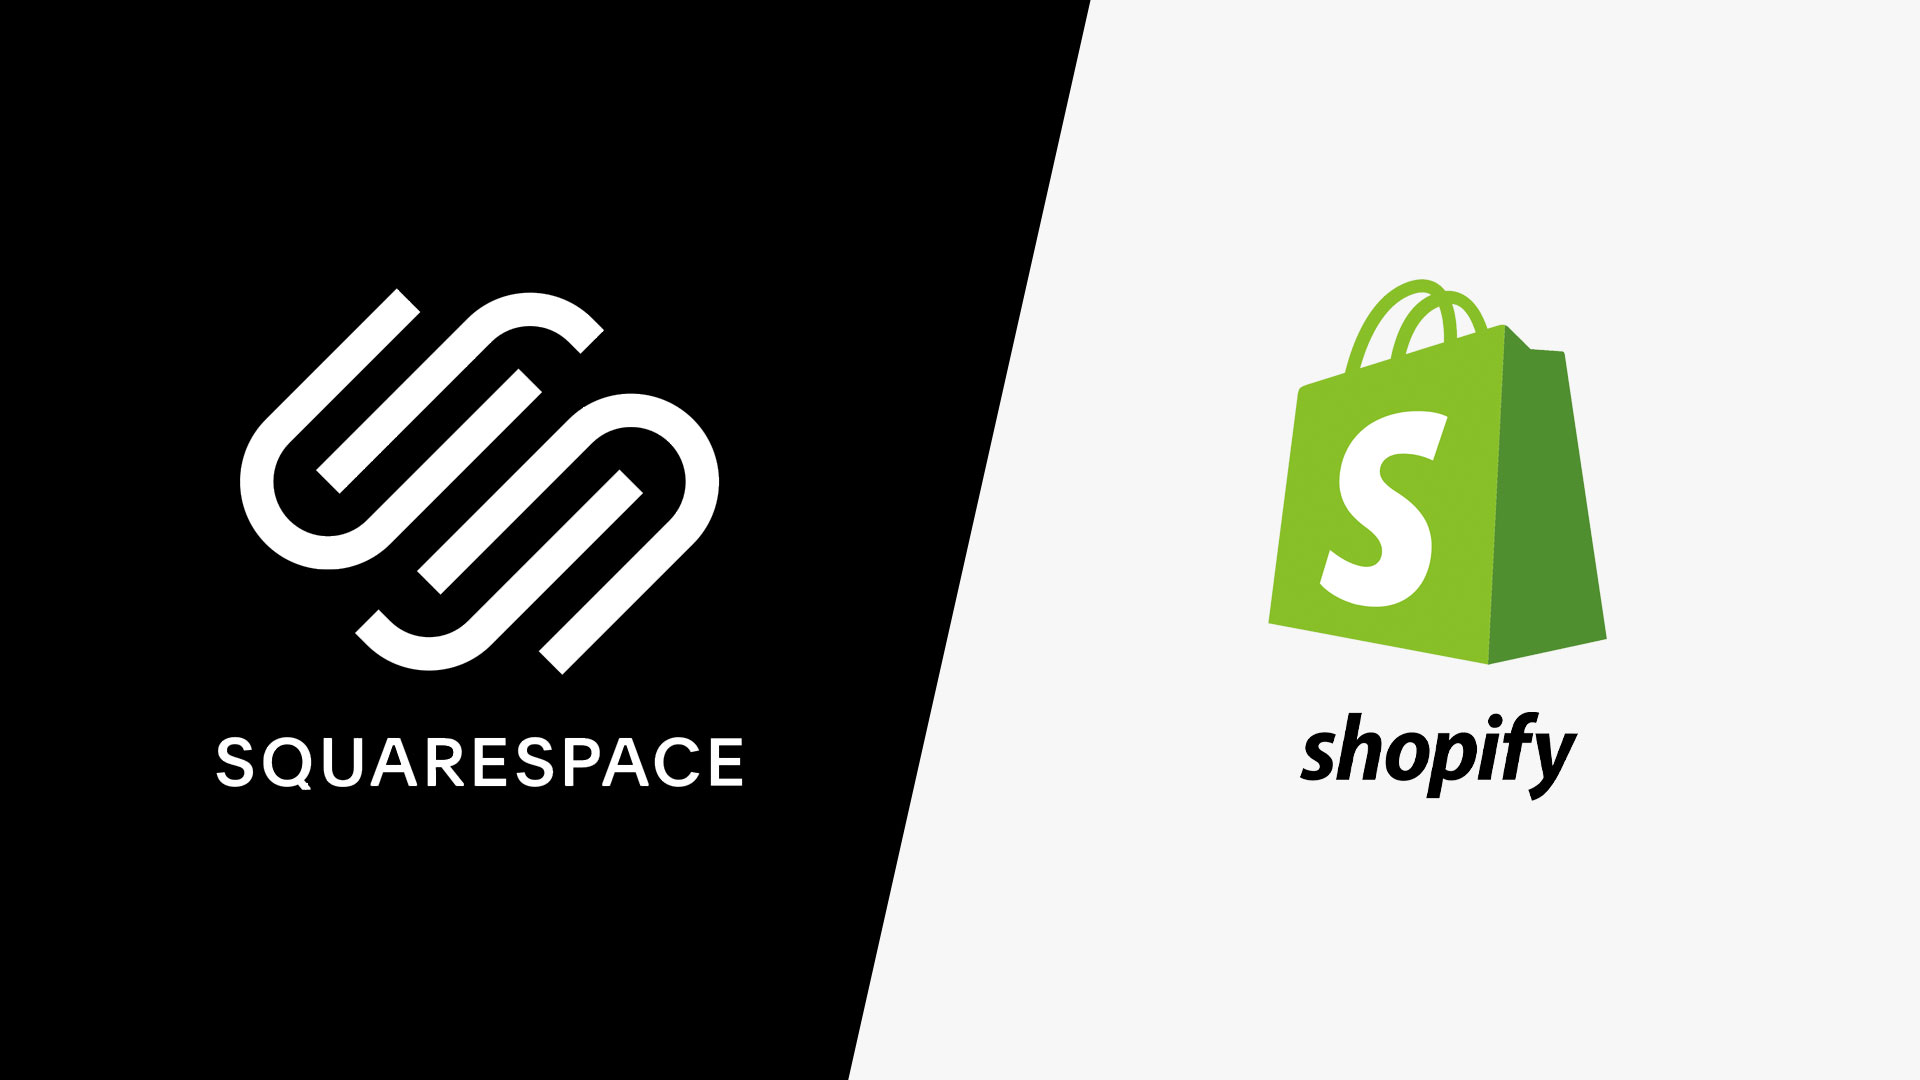 Why Should You Migrate From Squarespace to Shopify